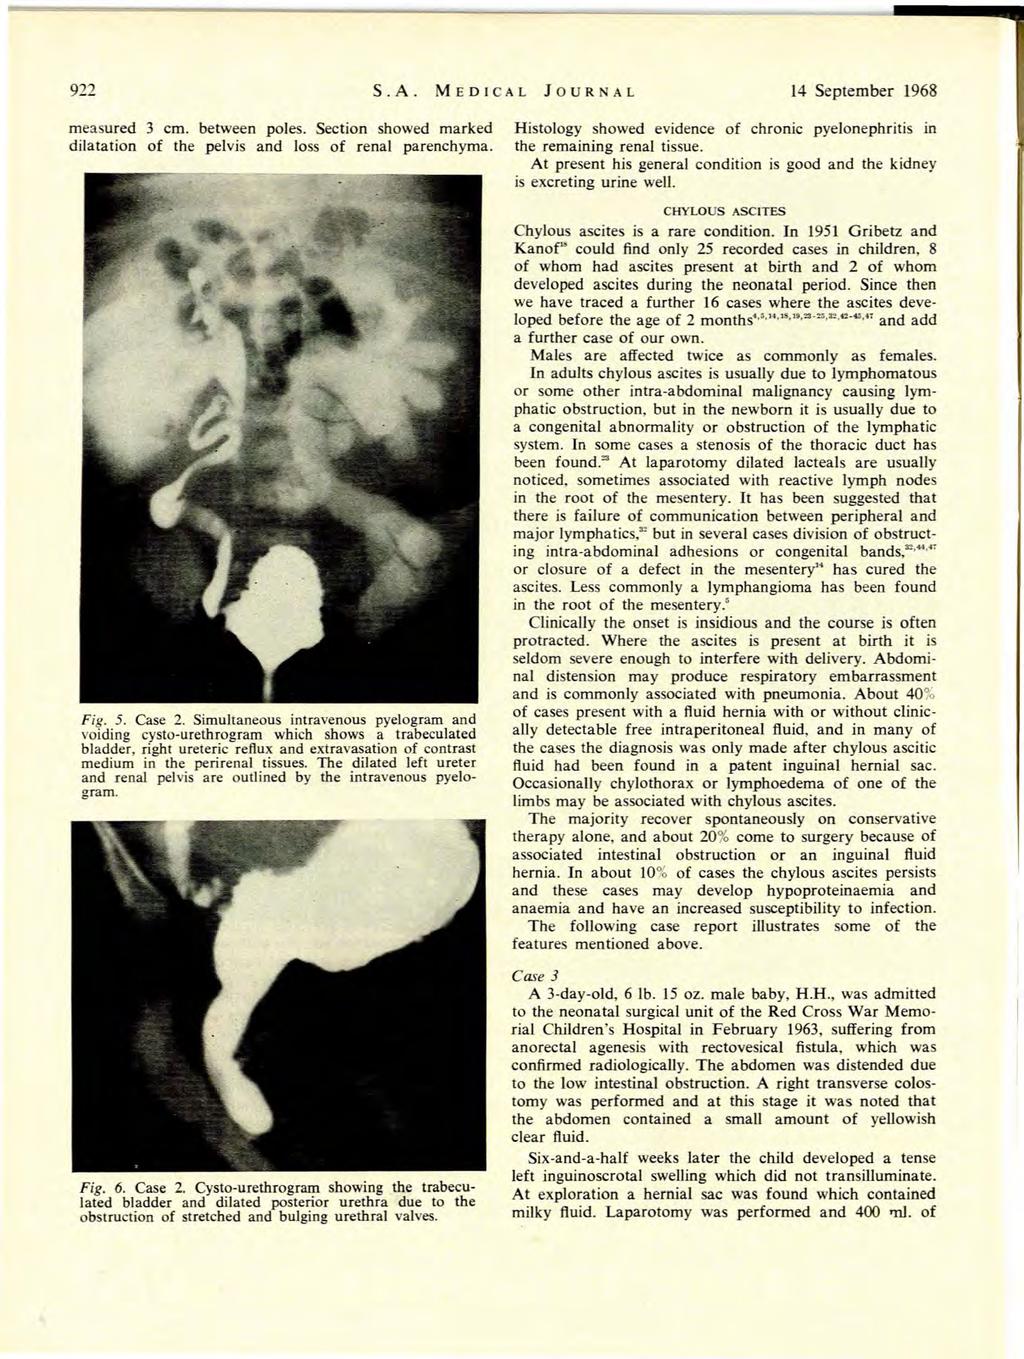 922 S.A. MEDCAL JOURNAL 14 September 1968 measured 3 cm. between poles. Section showed marked dilatation of the pelvis and loss of renal parenchyma. Fig. 5. Case 2.